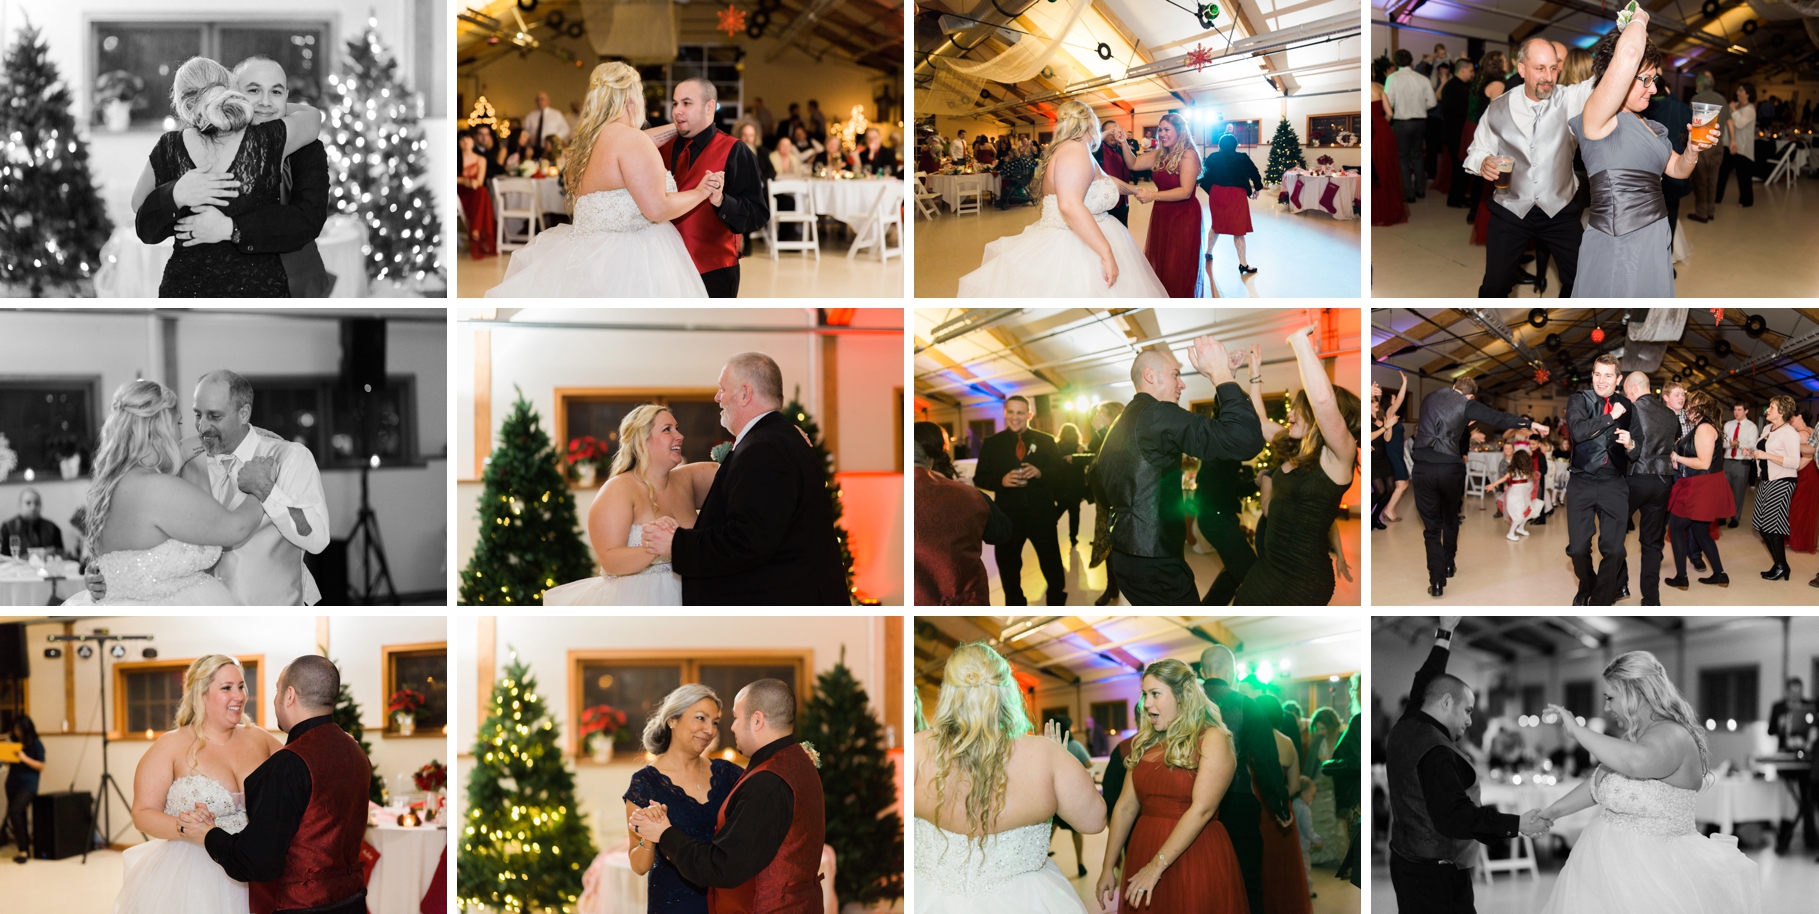 22-Reception-Christmas-Wedding-Pickering-Barn-Issaquah-Christmas-Wedding-Winter-Wedding-Photographer-Seattle-Photography-by-Betty-Elaine